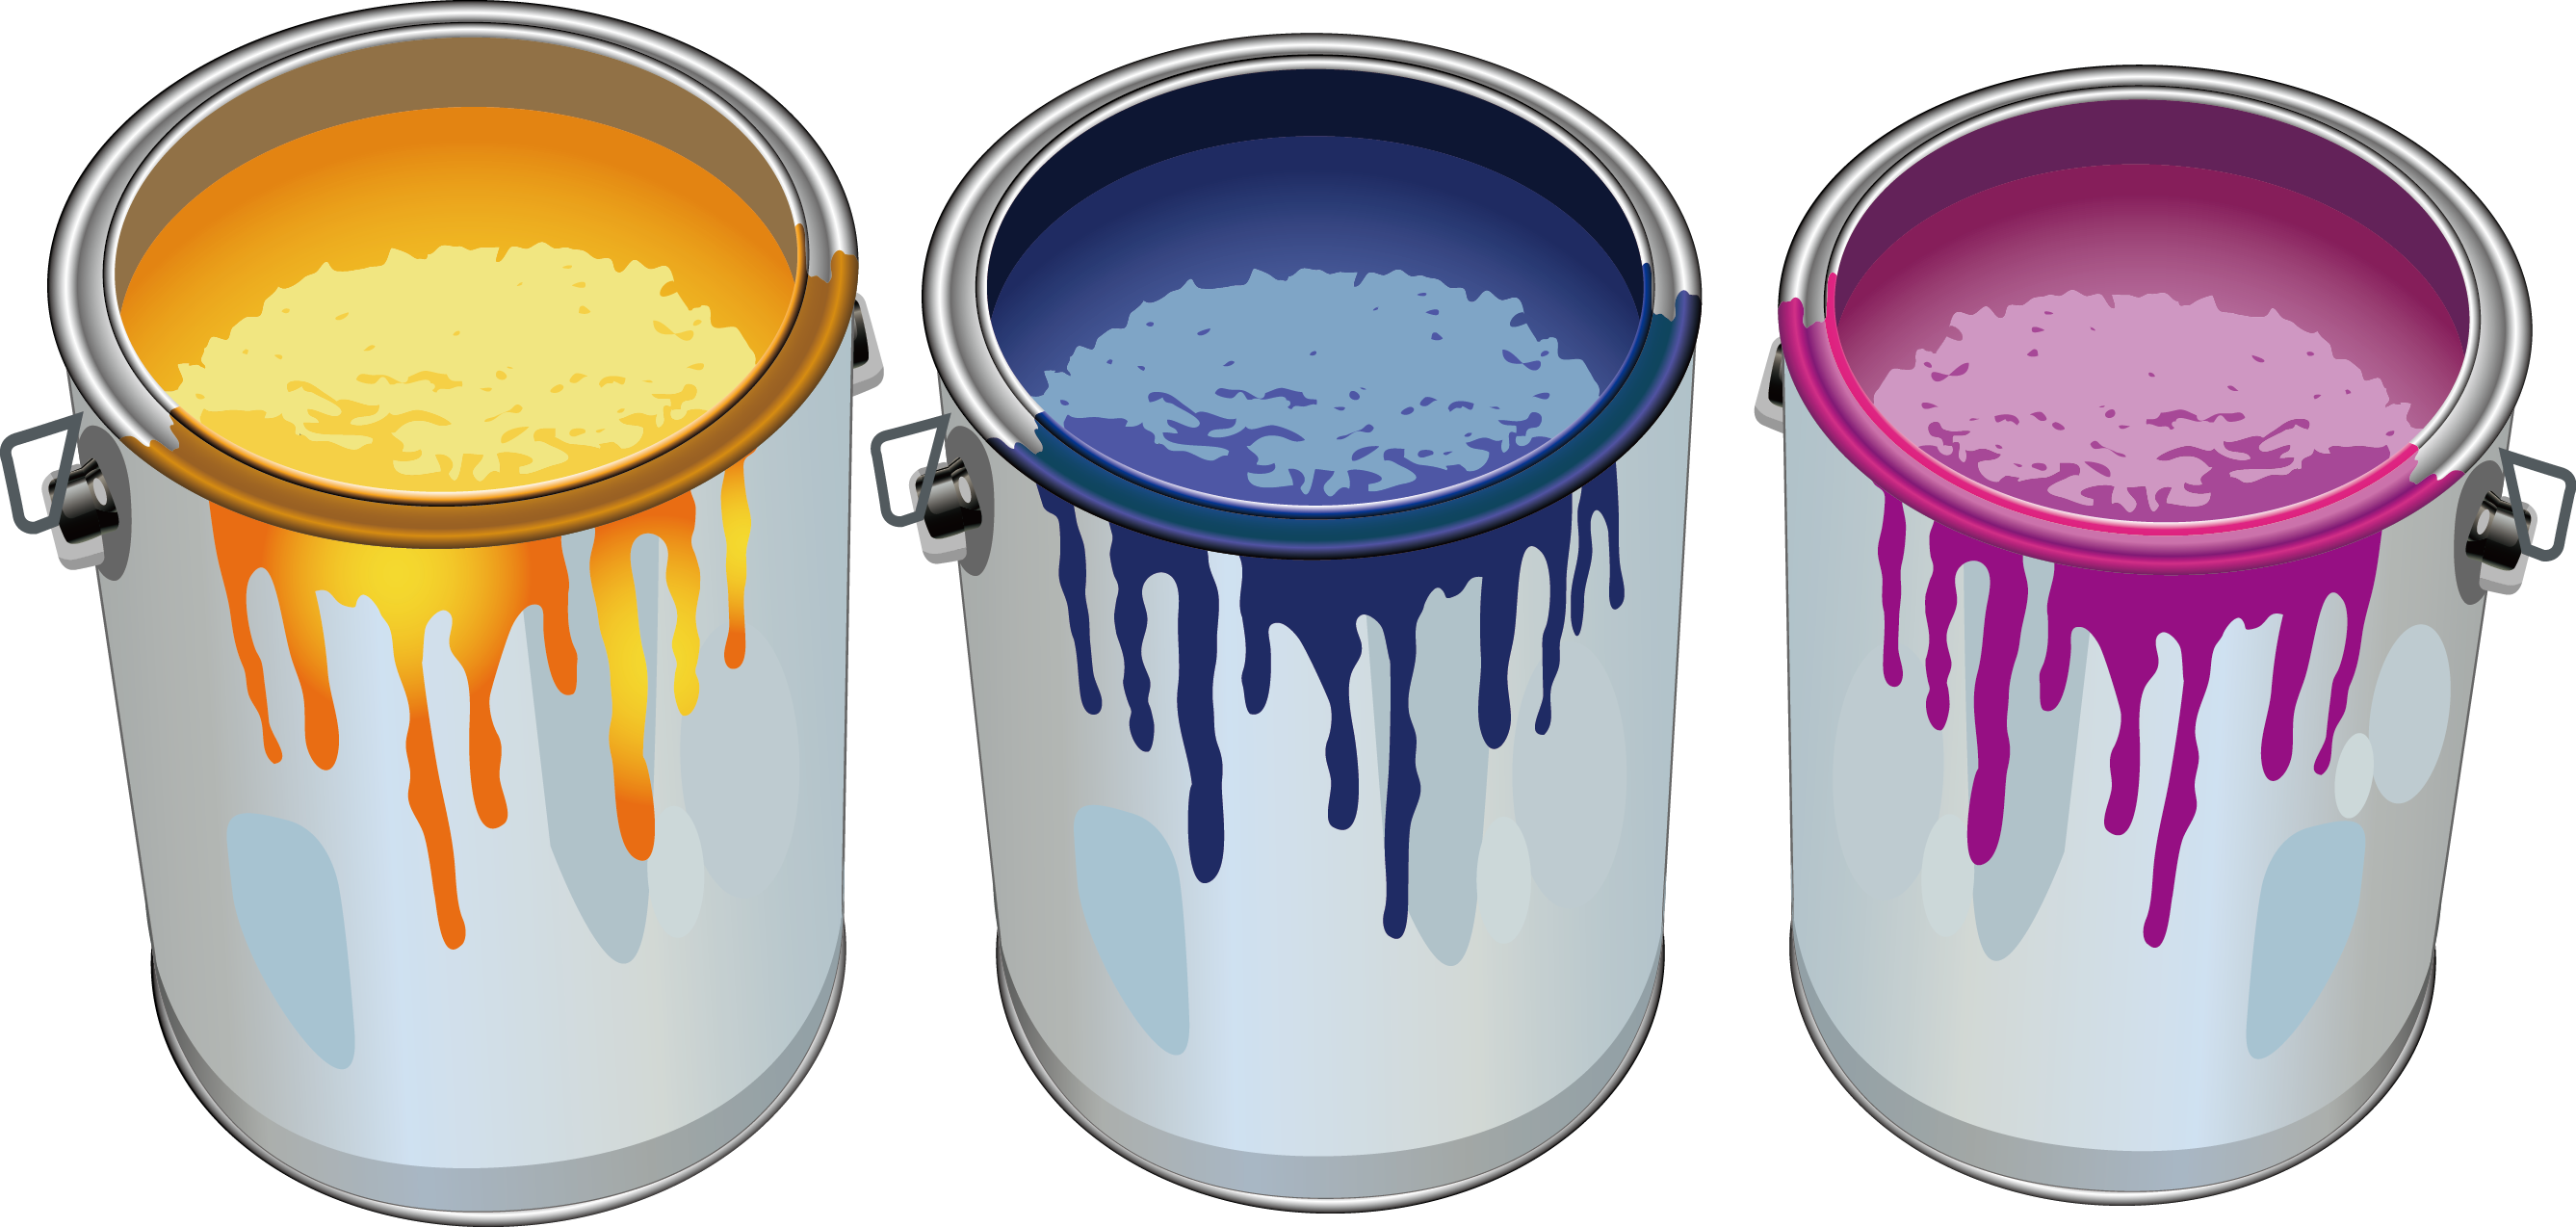 Paint Bucket Painting Cartoon PNG Image High Quality Clipart